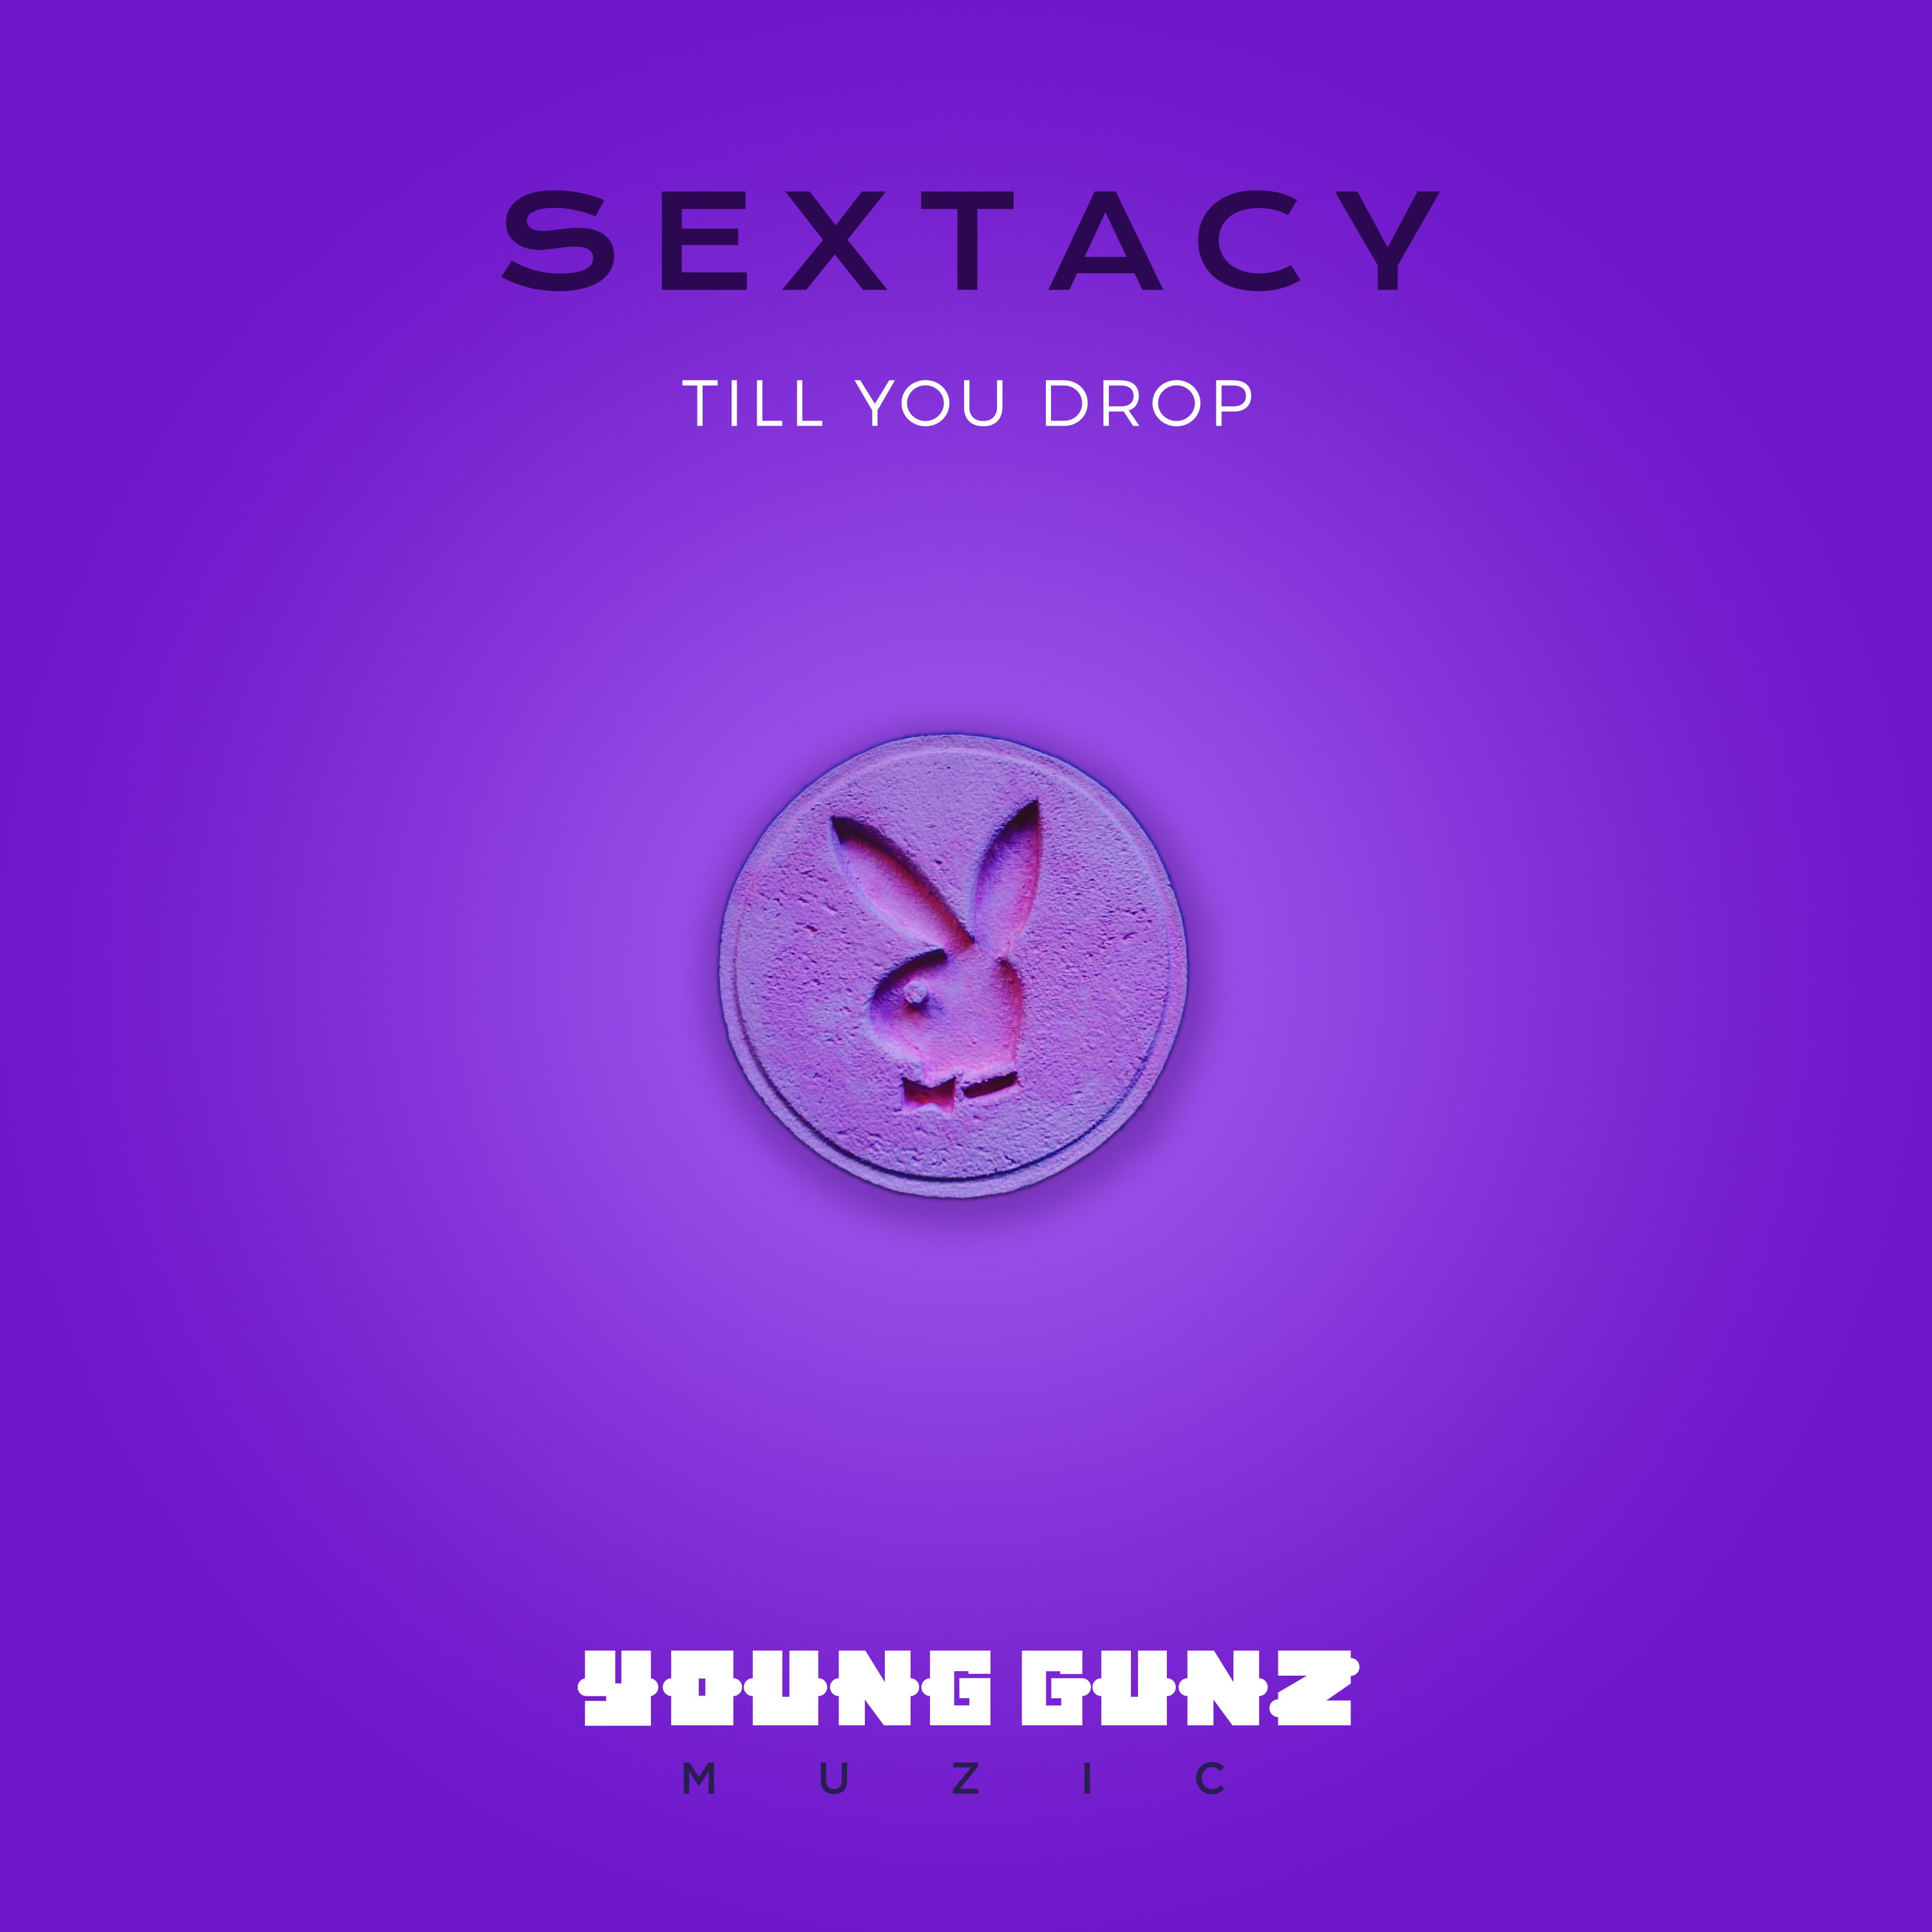 Sextacy_TillYouDrop_cover_01